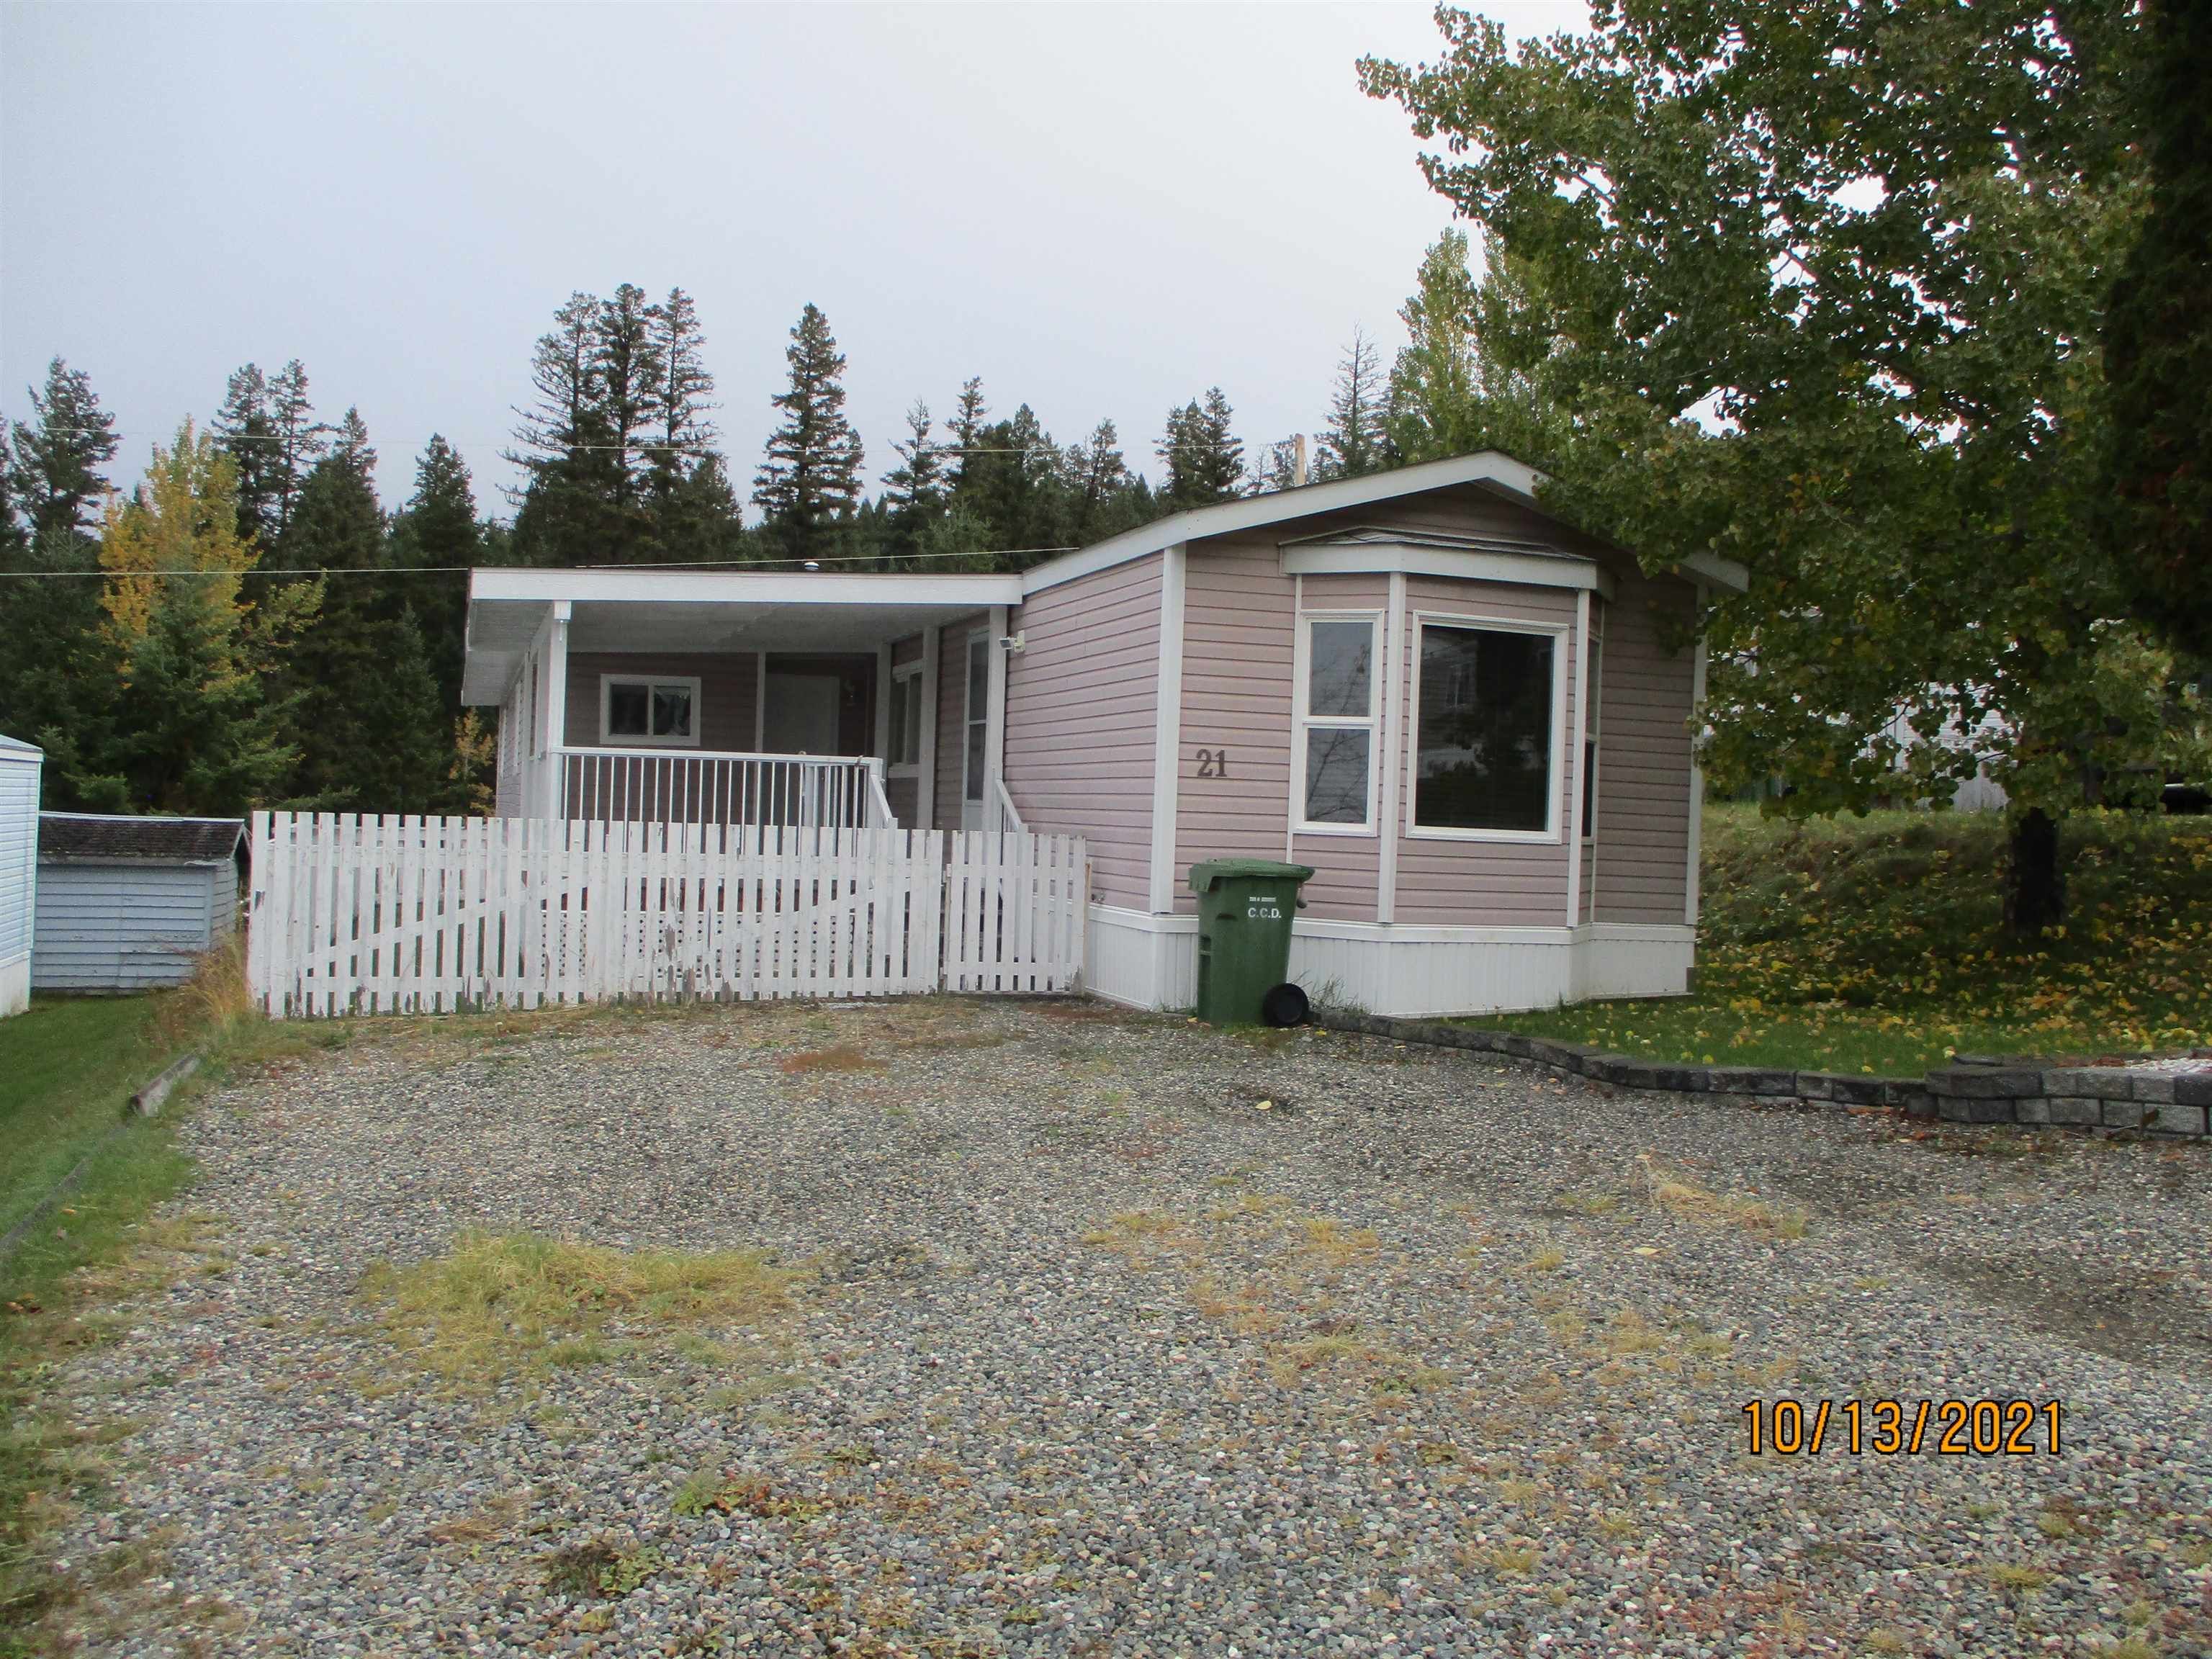 Photo 15: Photos: 21 997 CHILCOTIN 20 Highway in Williams Lake: Williams Lake - Rural West Manufactured Home for sale (Williams Lake (Zone 27))  : MLS®# R2626208